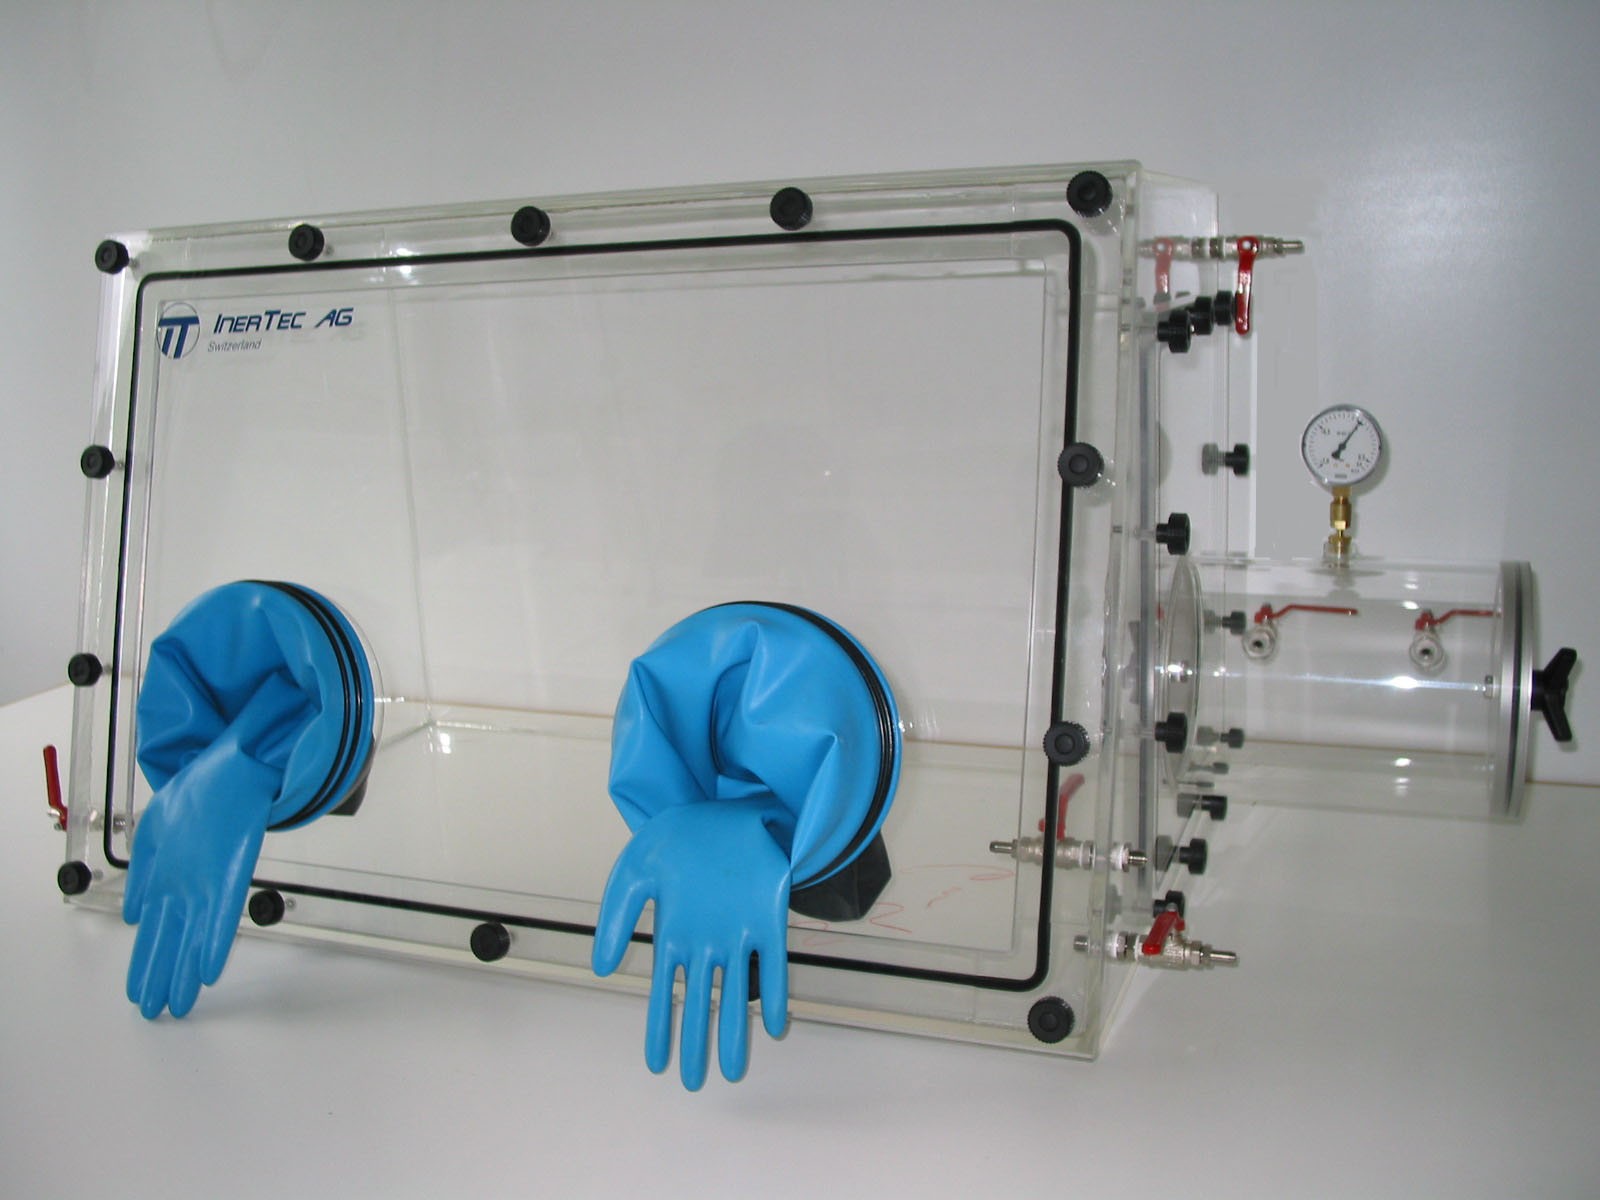 Glovebox made of acrylic&gt; Gas filling: automatic flushing with pressure control, front design: removable, side design: hinged doors, control: oxygen and humidity regulator with data logger